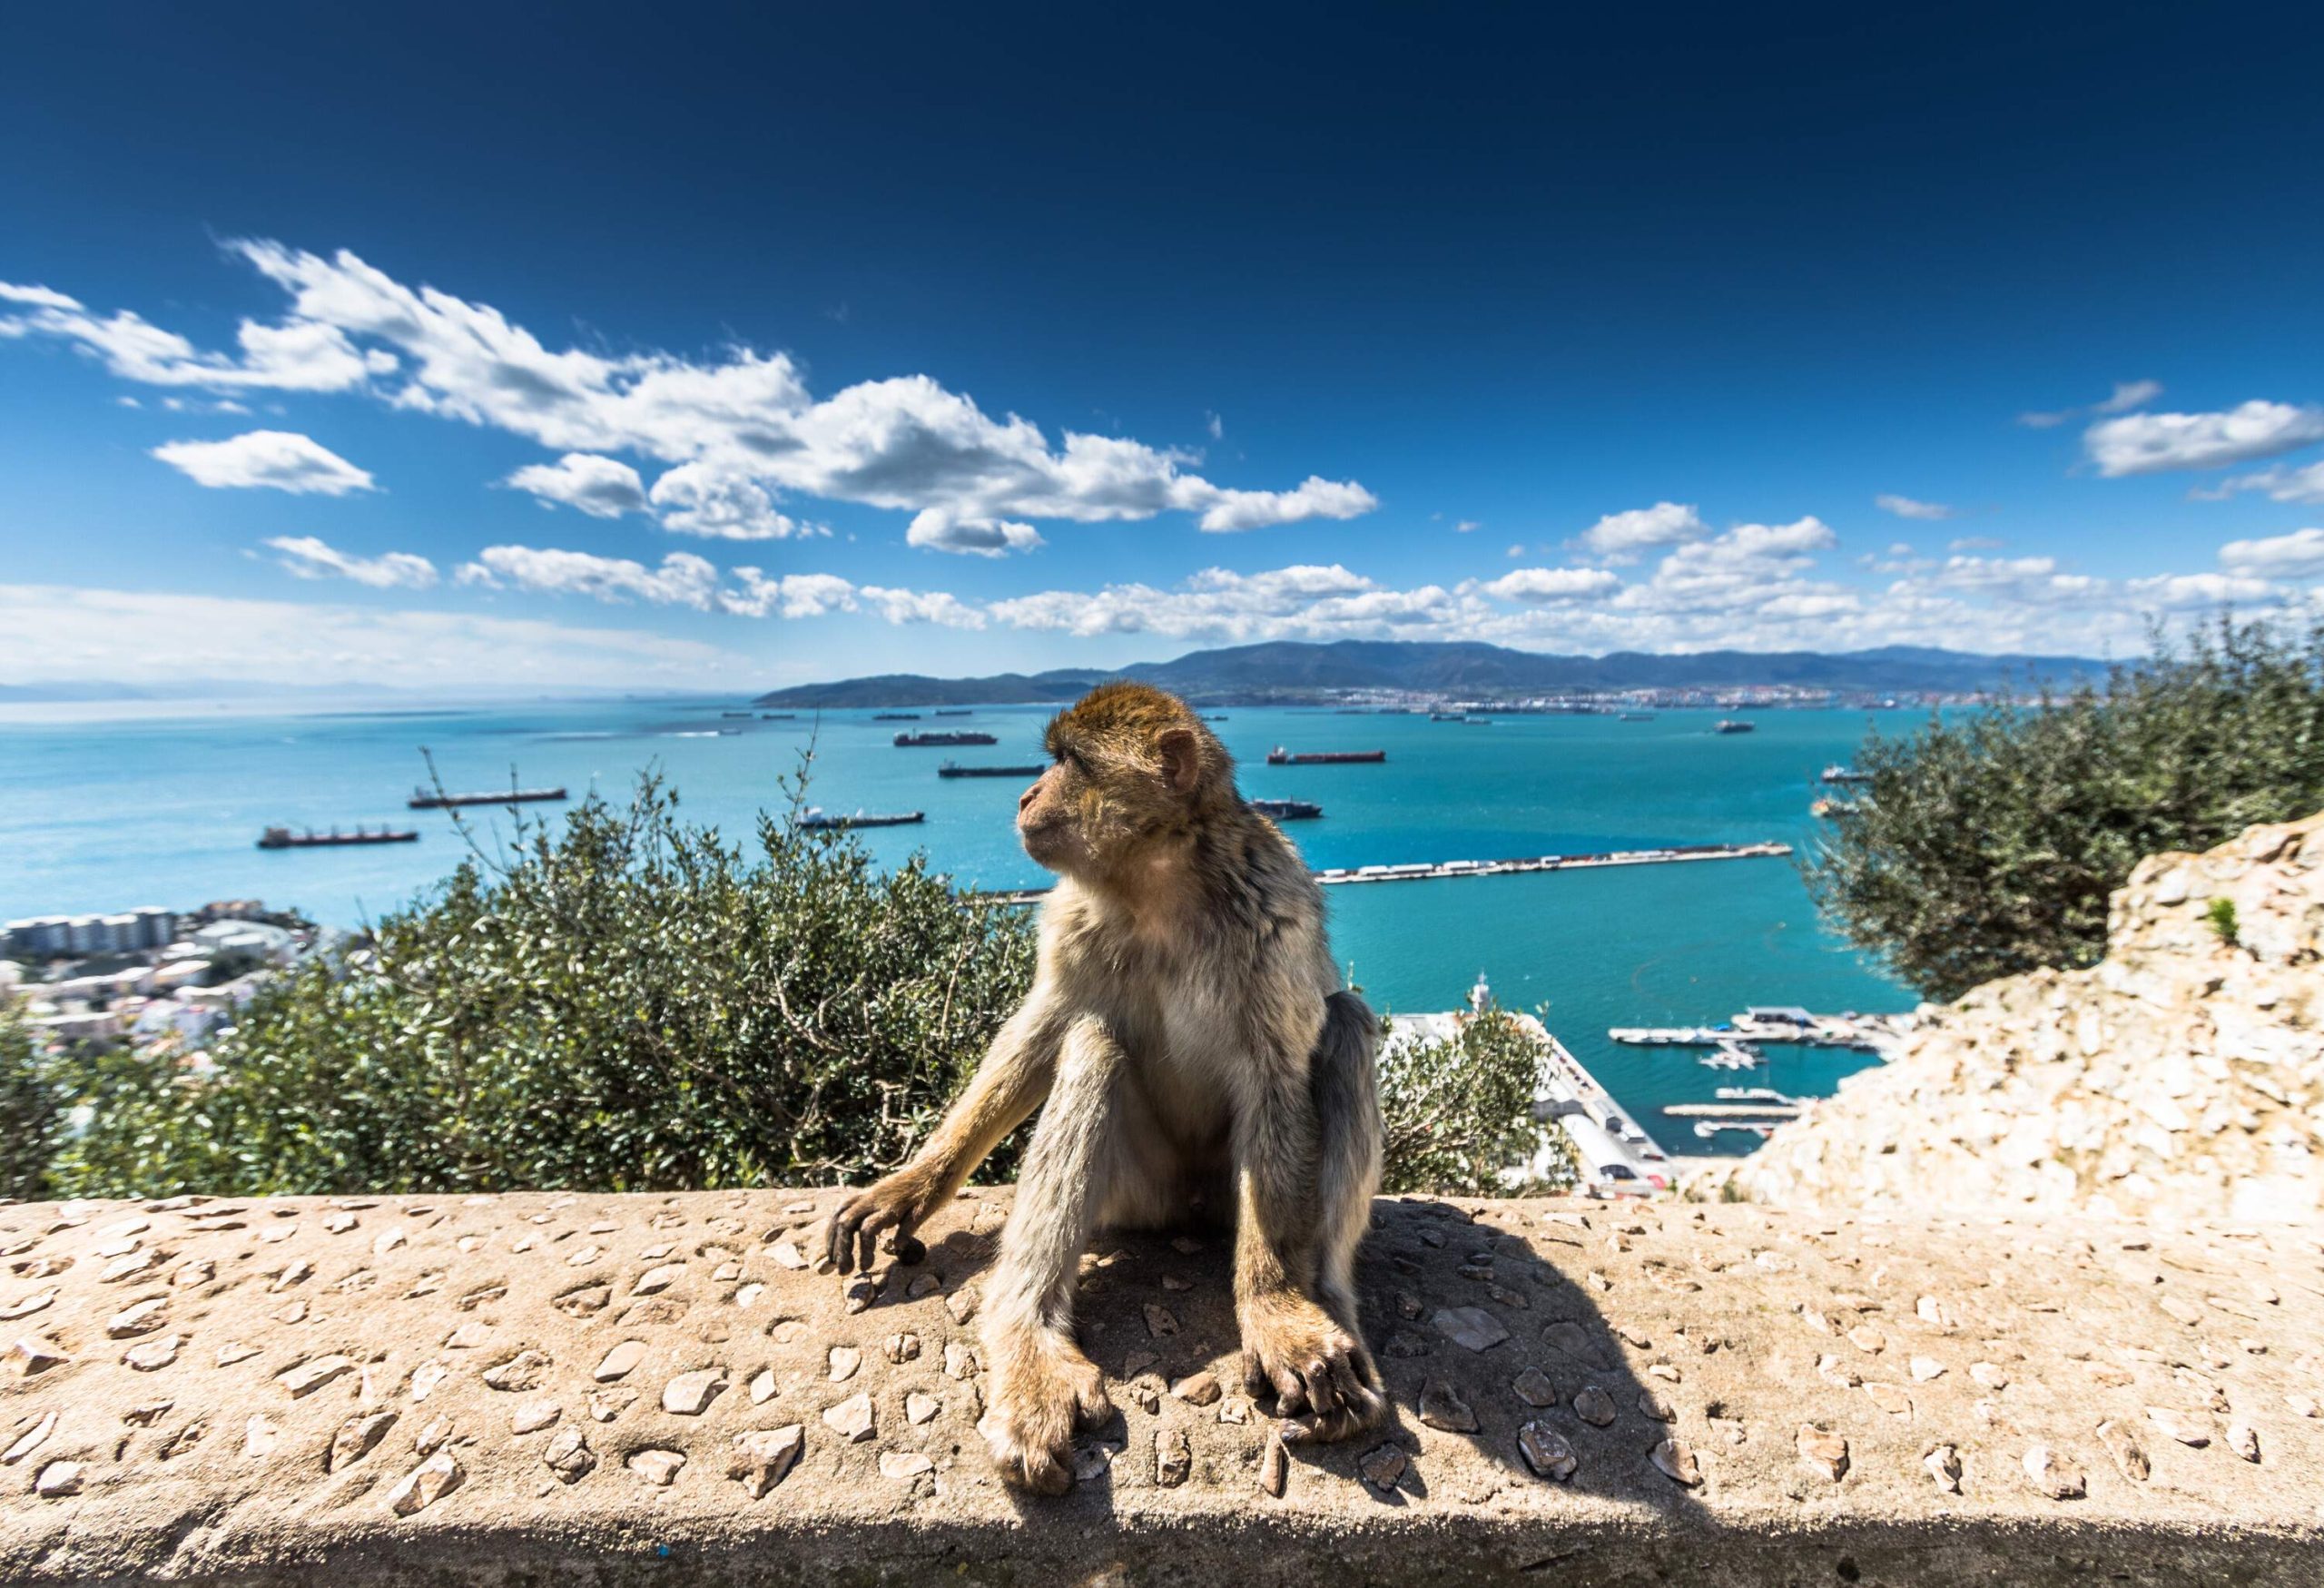 A monkey casually sitting over a wall facing sideways, with the sea in the backdrop.